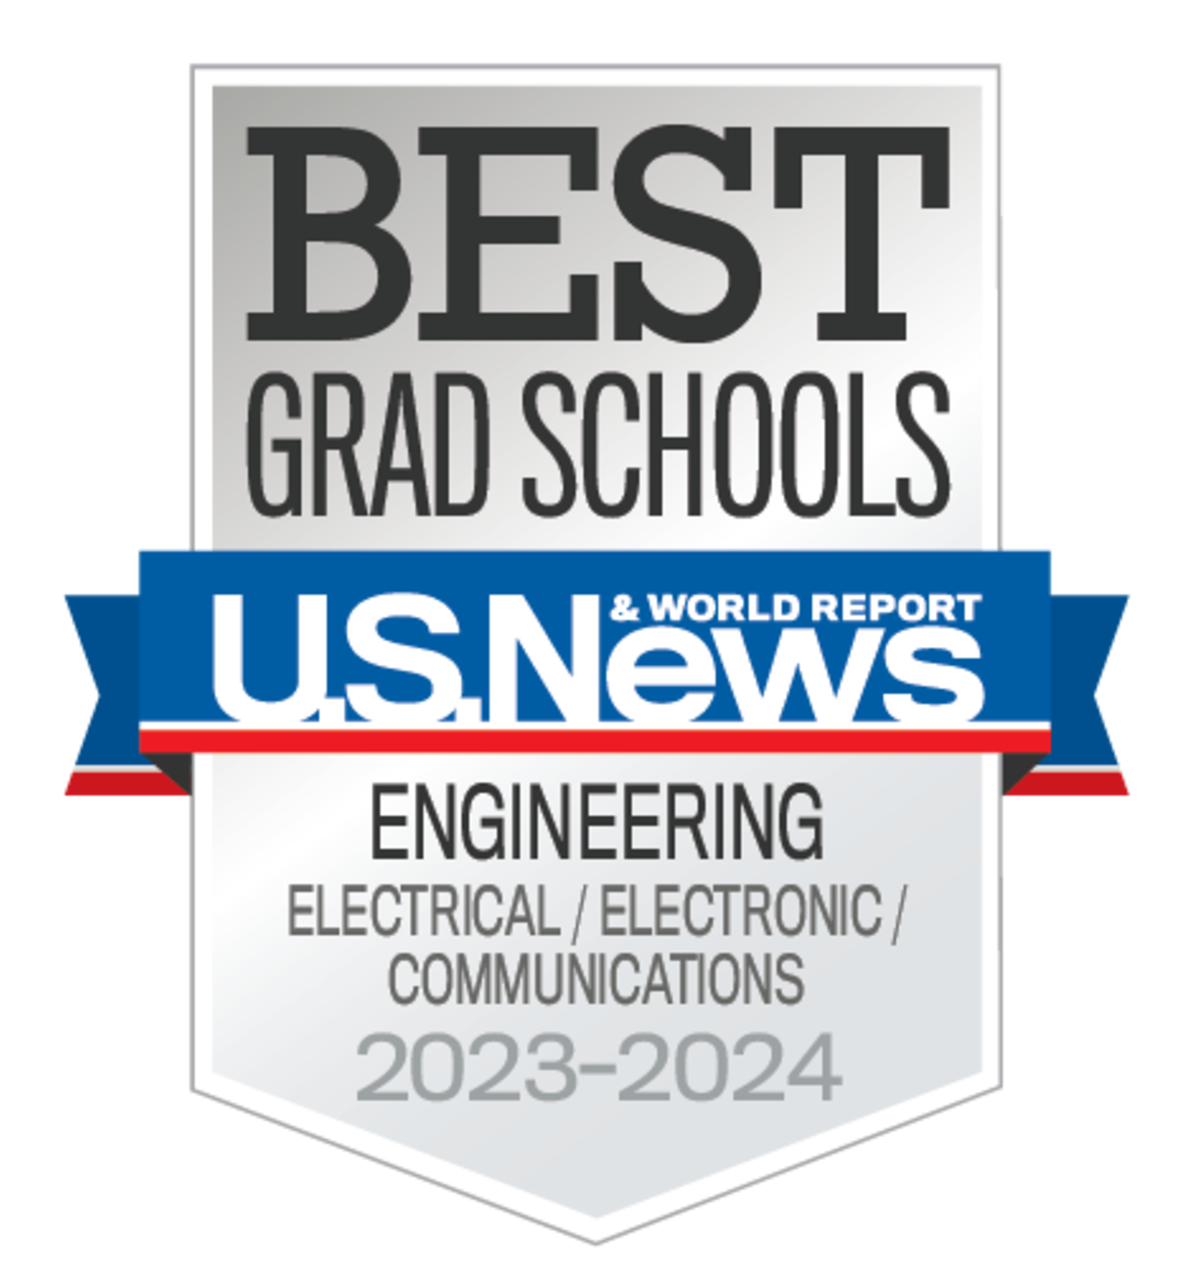 U.S. News and World Report 2023-24 Best Electrical / Electronic / Communications Engineering Badge